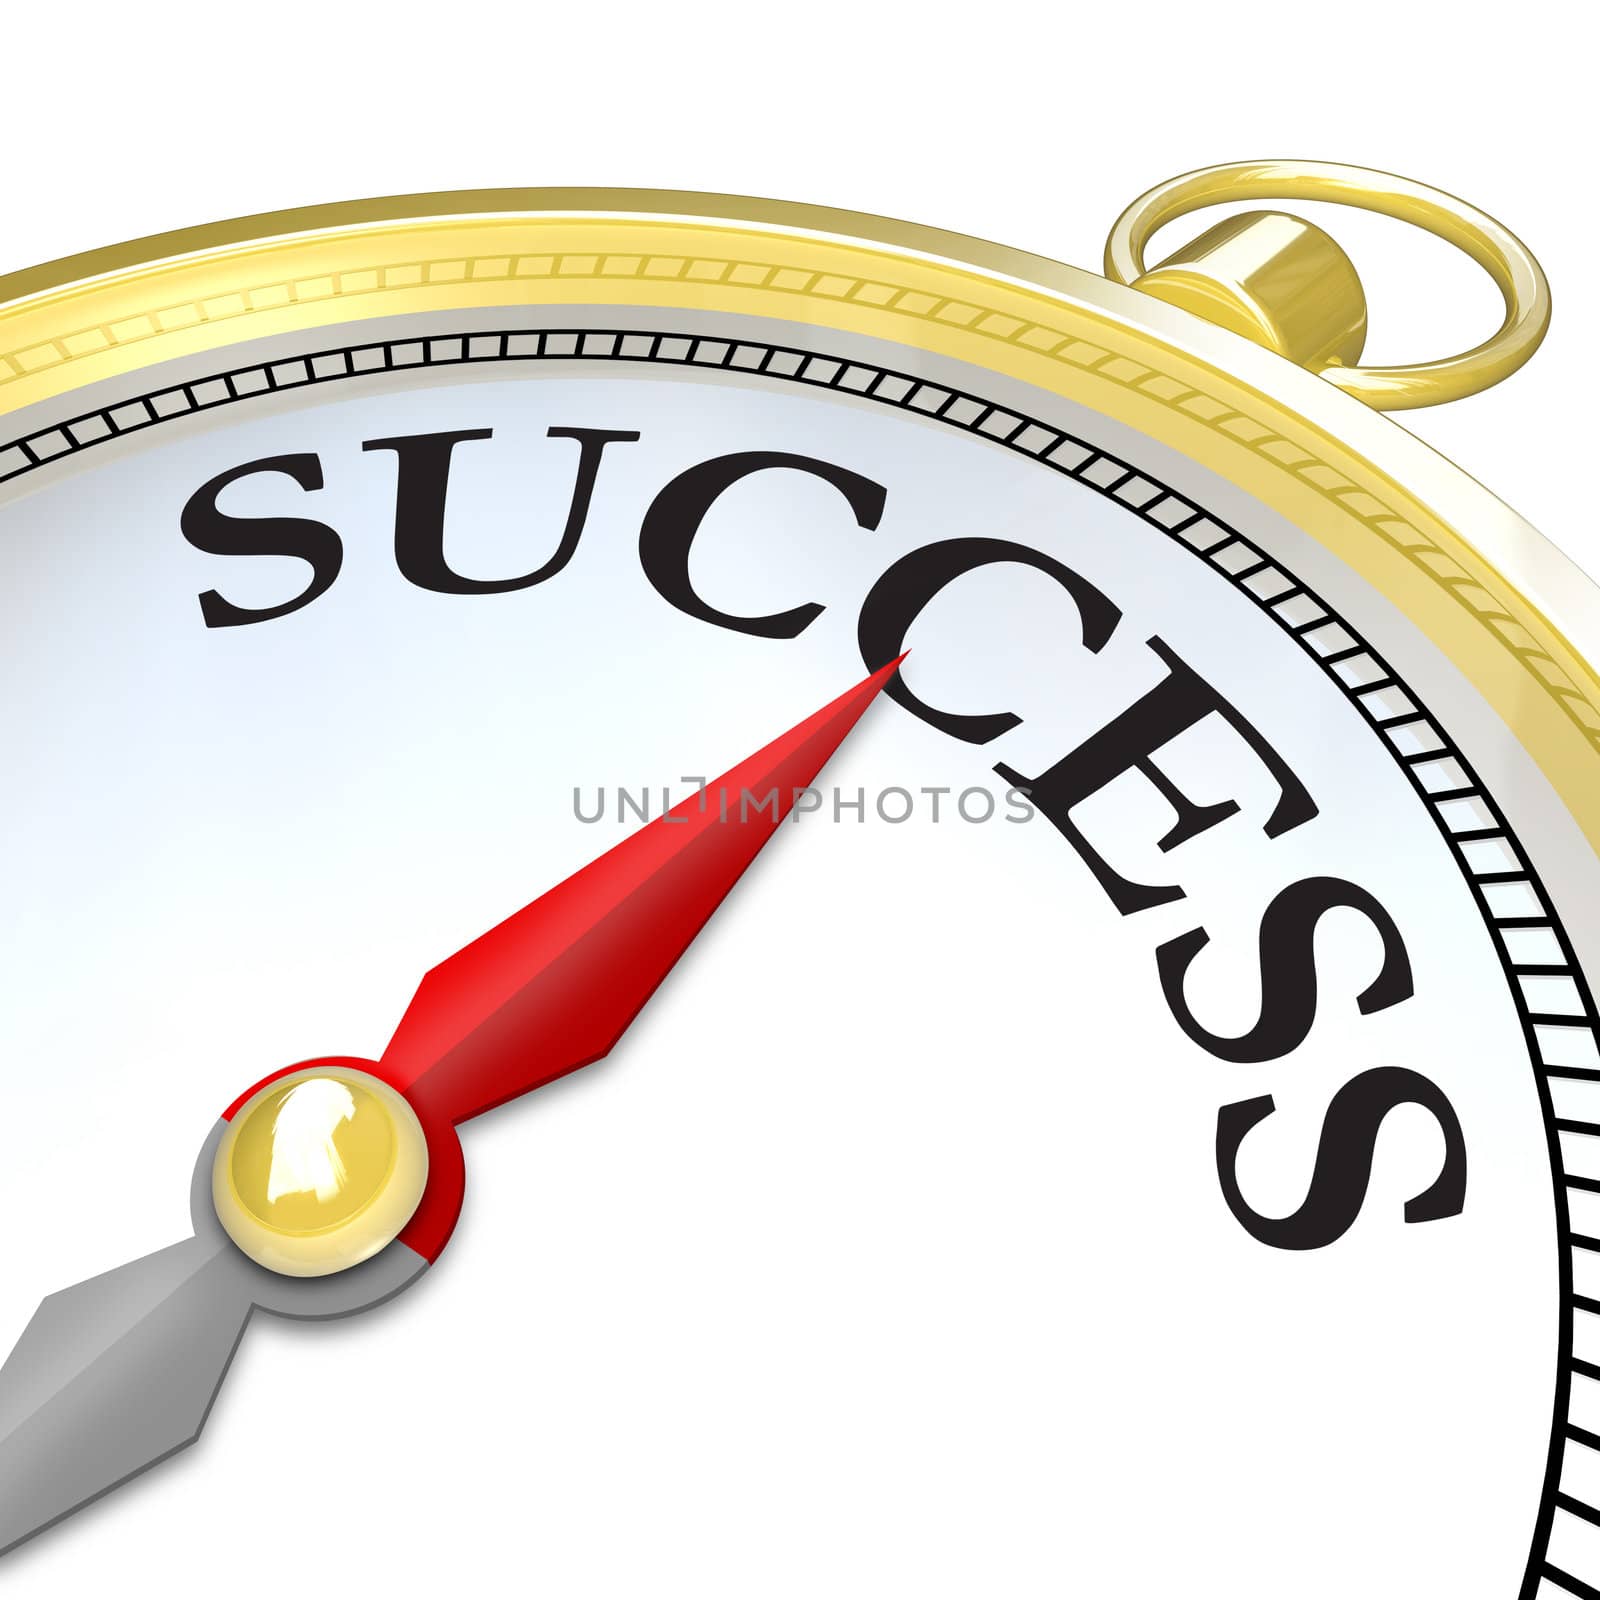 A compass with the word Success and a red arrow needle pointing to it, symbolizing that the search mission of finding your objective has reached a successful conclusion